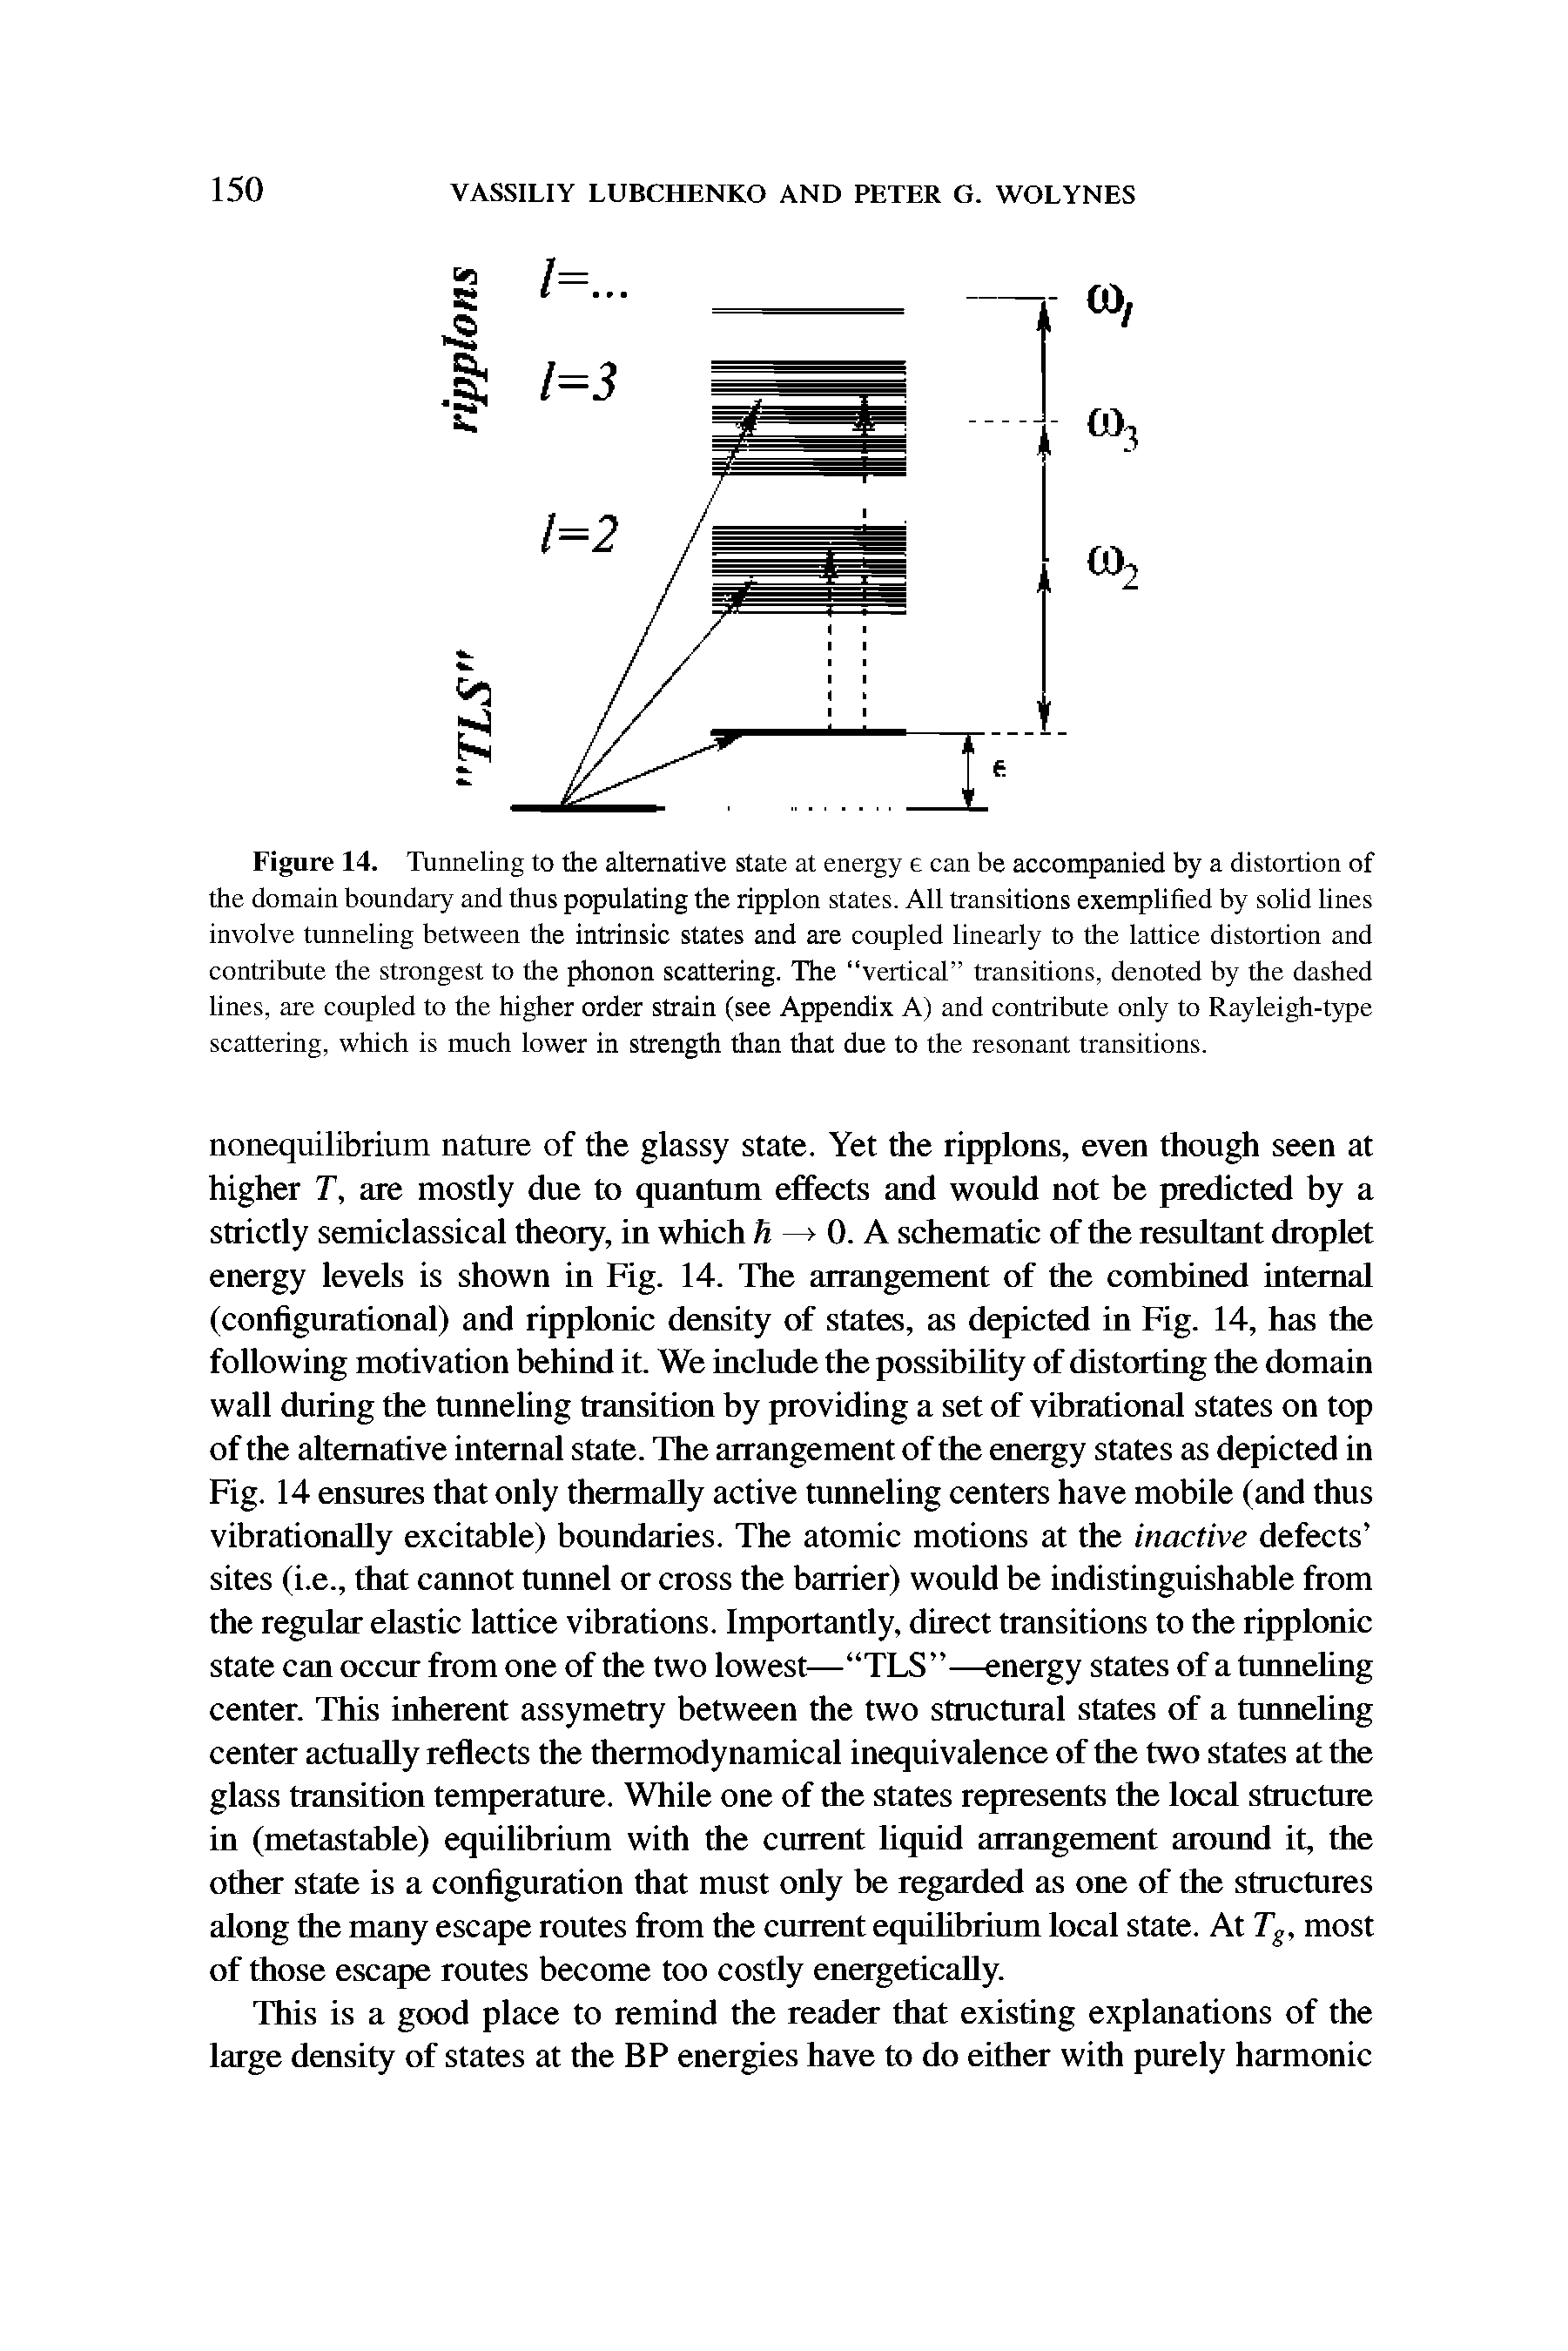 Figure 14. Tunneling to the alternative state at energy can be accompanied by a distortion of the domain boundary and thus populating the ripplon states. All transitions exemplified by solid lines involve tunneling between the intrinsic states and are coupled linearly to the lattice distortion and contribute the strongest to the phonon scattering. The vertical transitions, denoted by the dashed lines, are coupled to the higher order strain (see Appendix A) and contribute only to Rayleigh-type scattering, which is much lower in strength than that due to the resonant transitions.